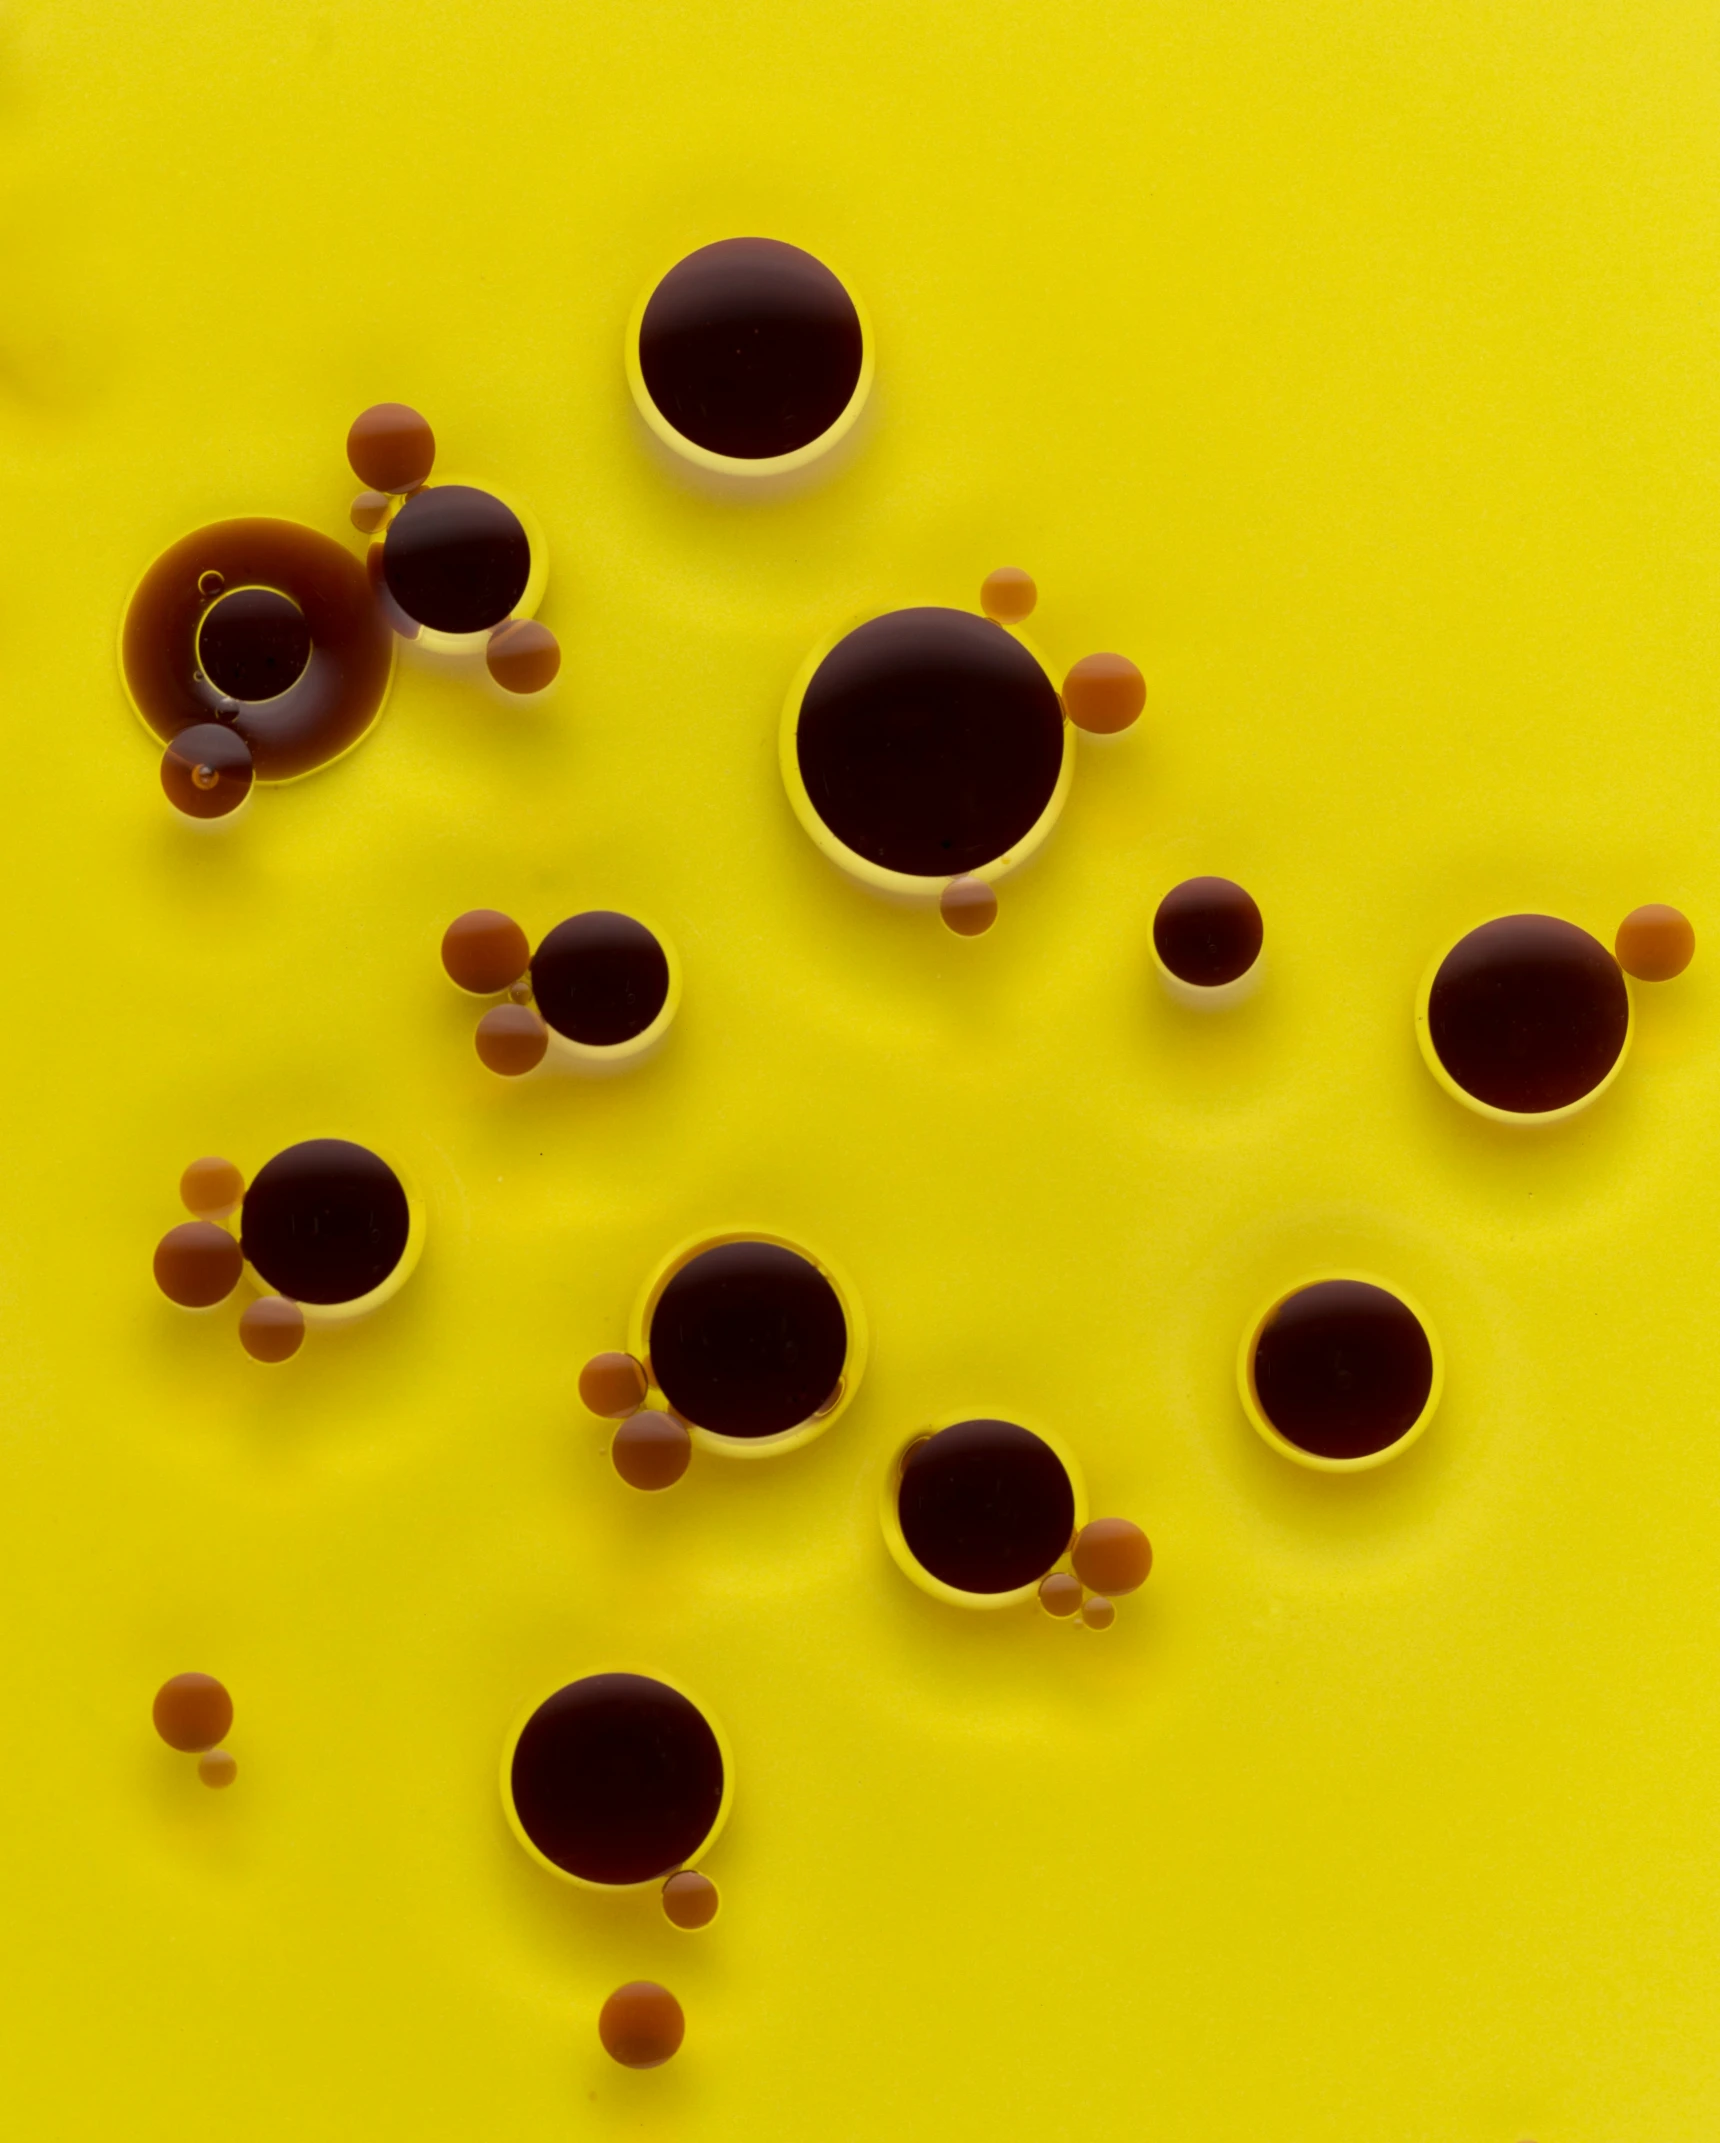 oil on a yellow background containing circles and circles